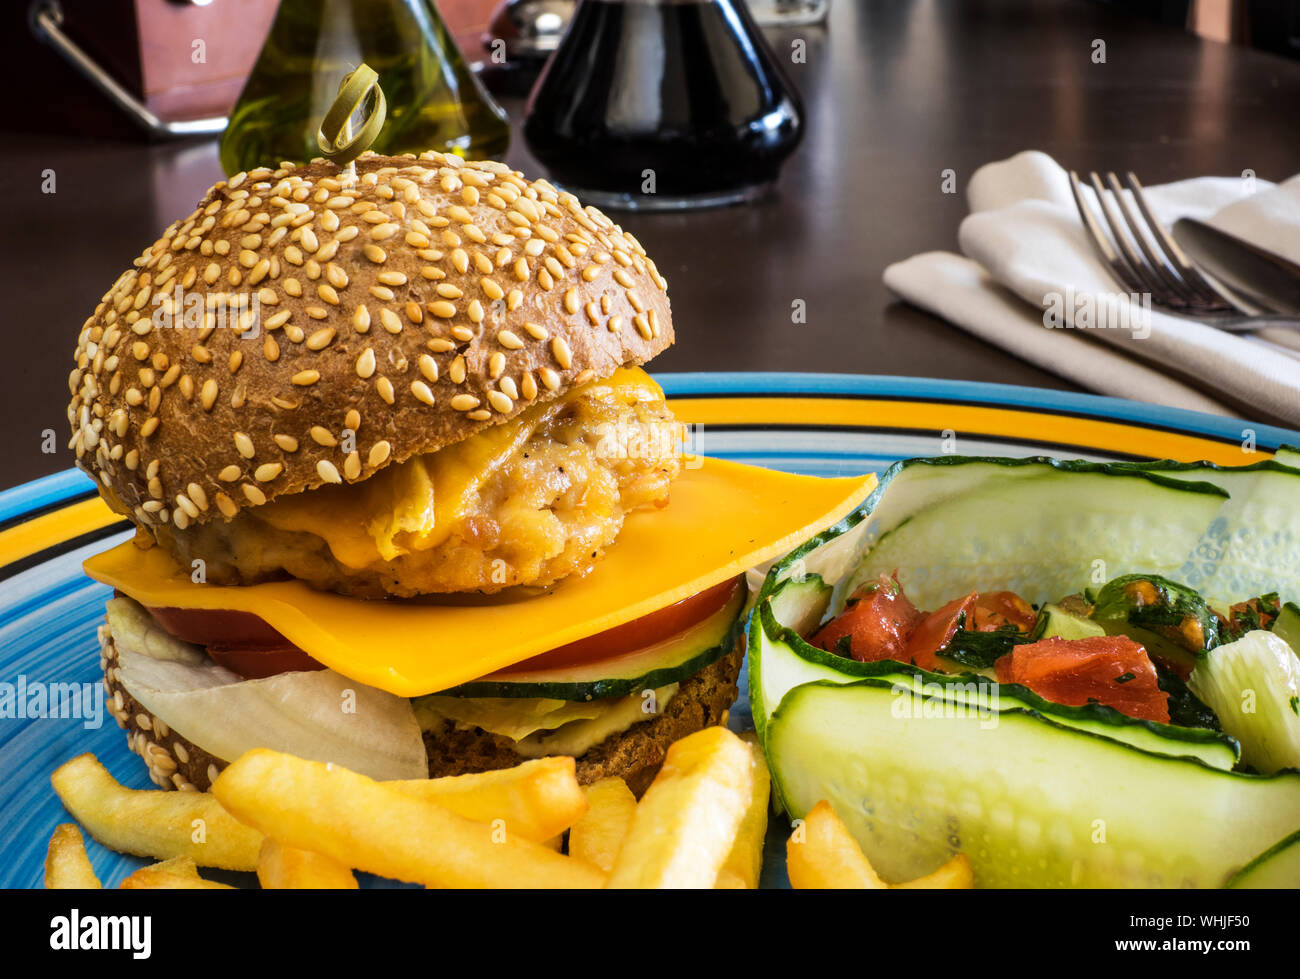 Close-up Of Cheeseburger With French Fries Served In Plate Stock Photo